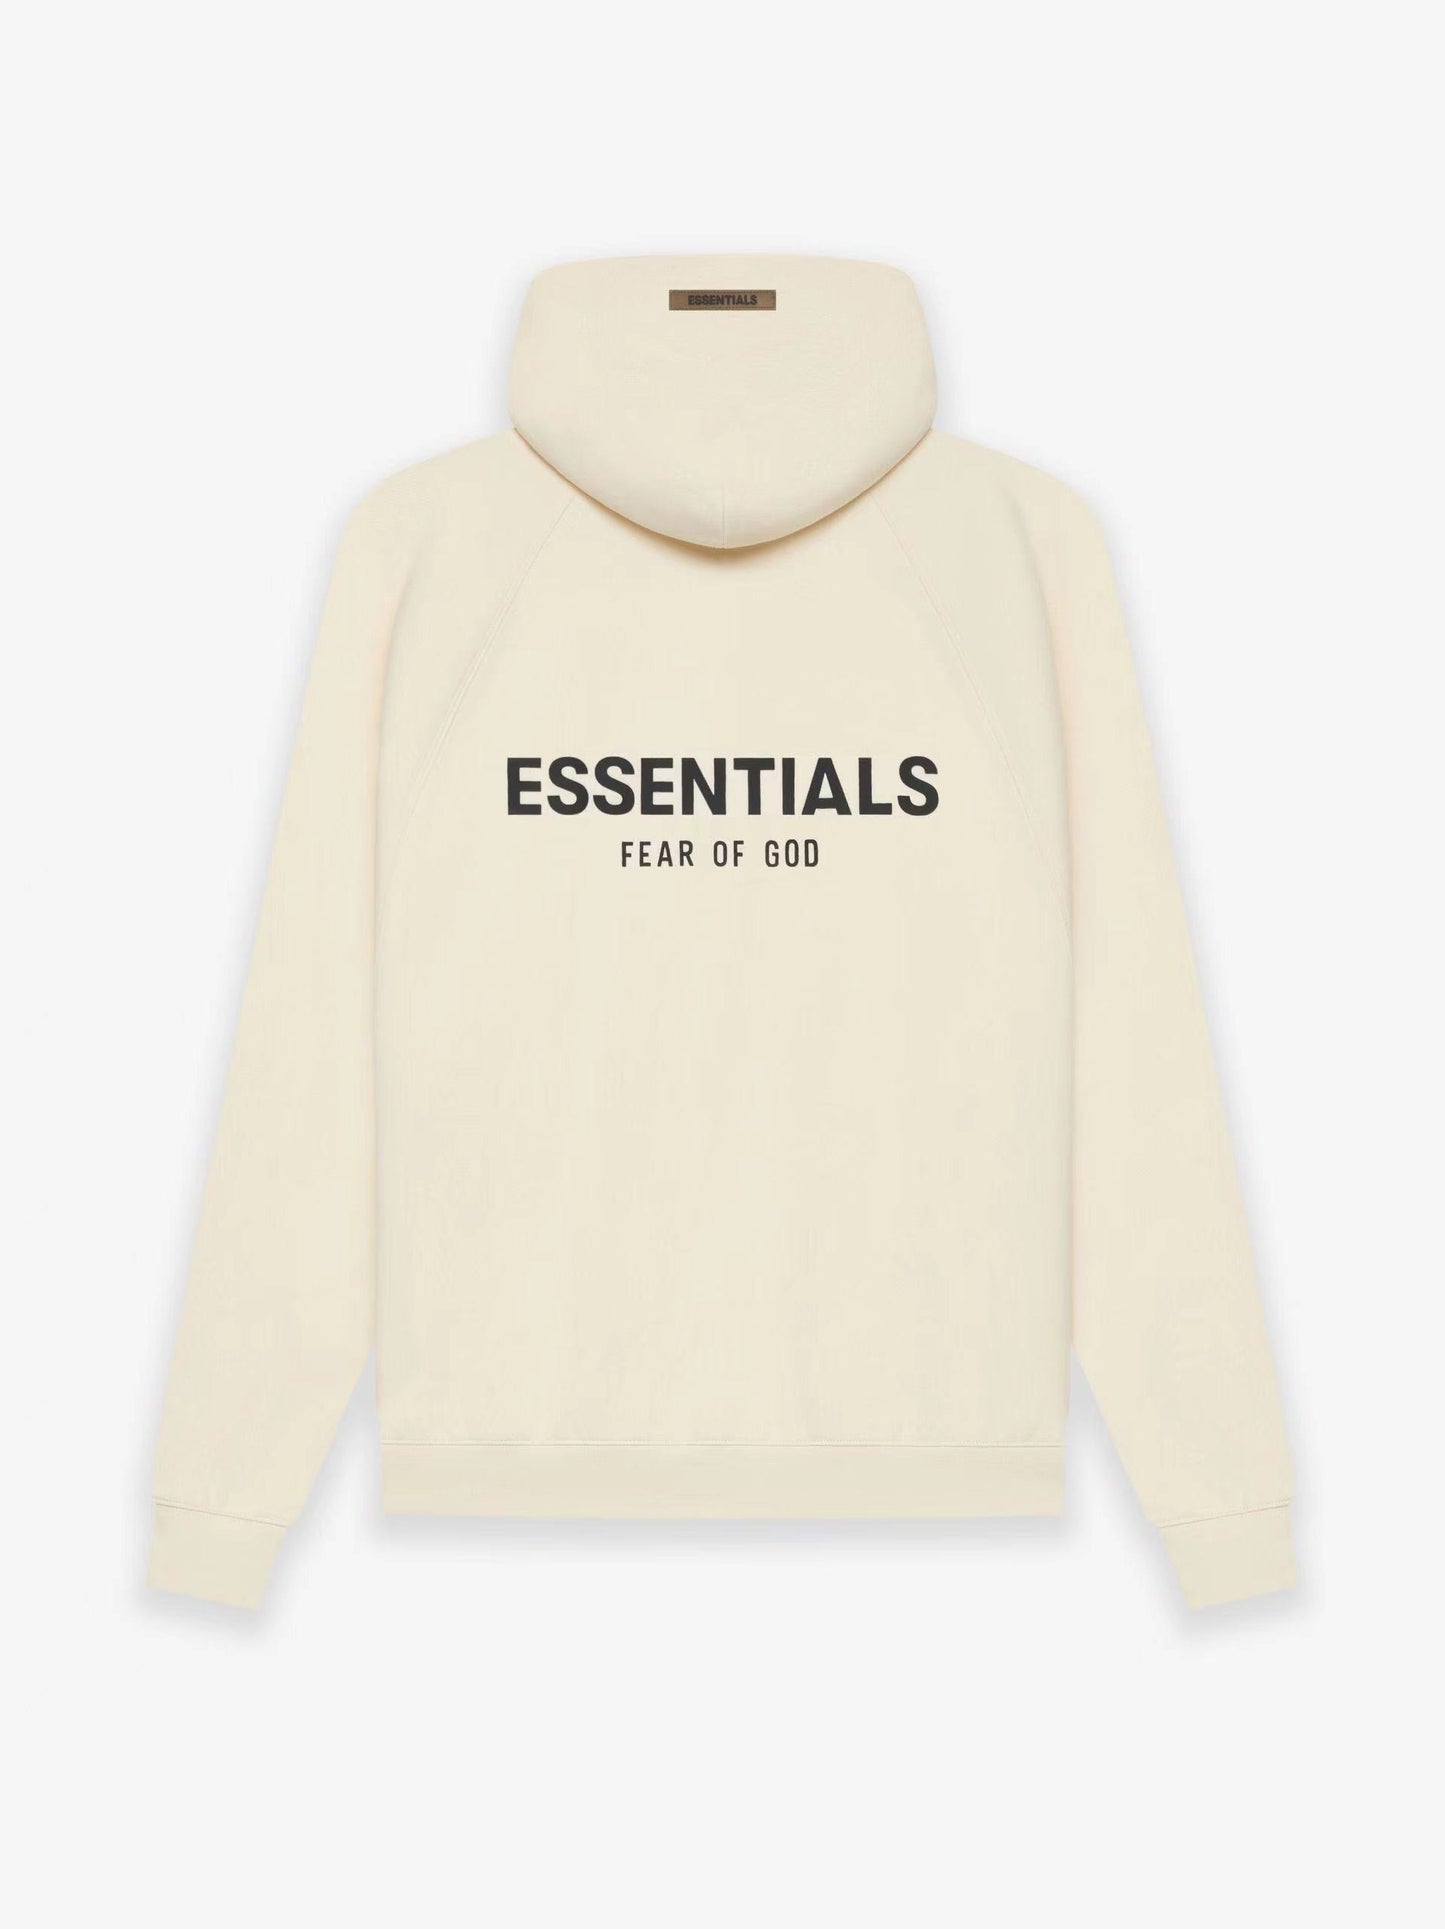 FEAR OF GOD ESSENTIALS PULL‑OVER HOODIE (SS21) CREAM/BUTTERCREAM